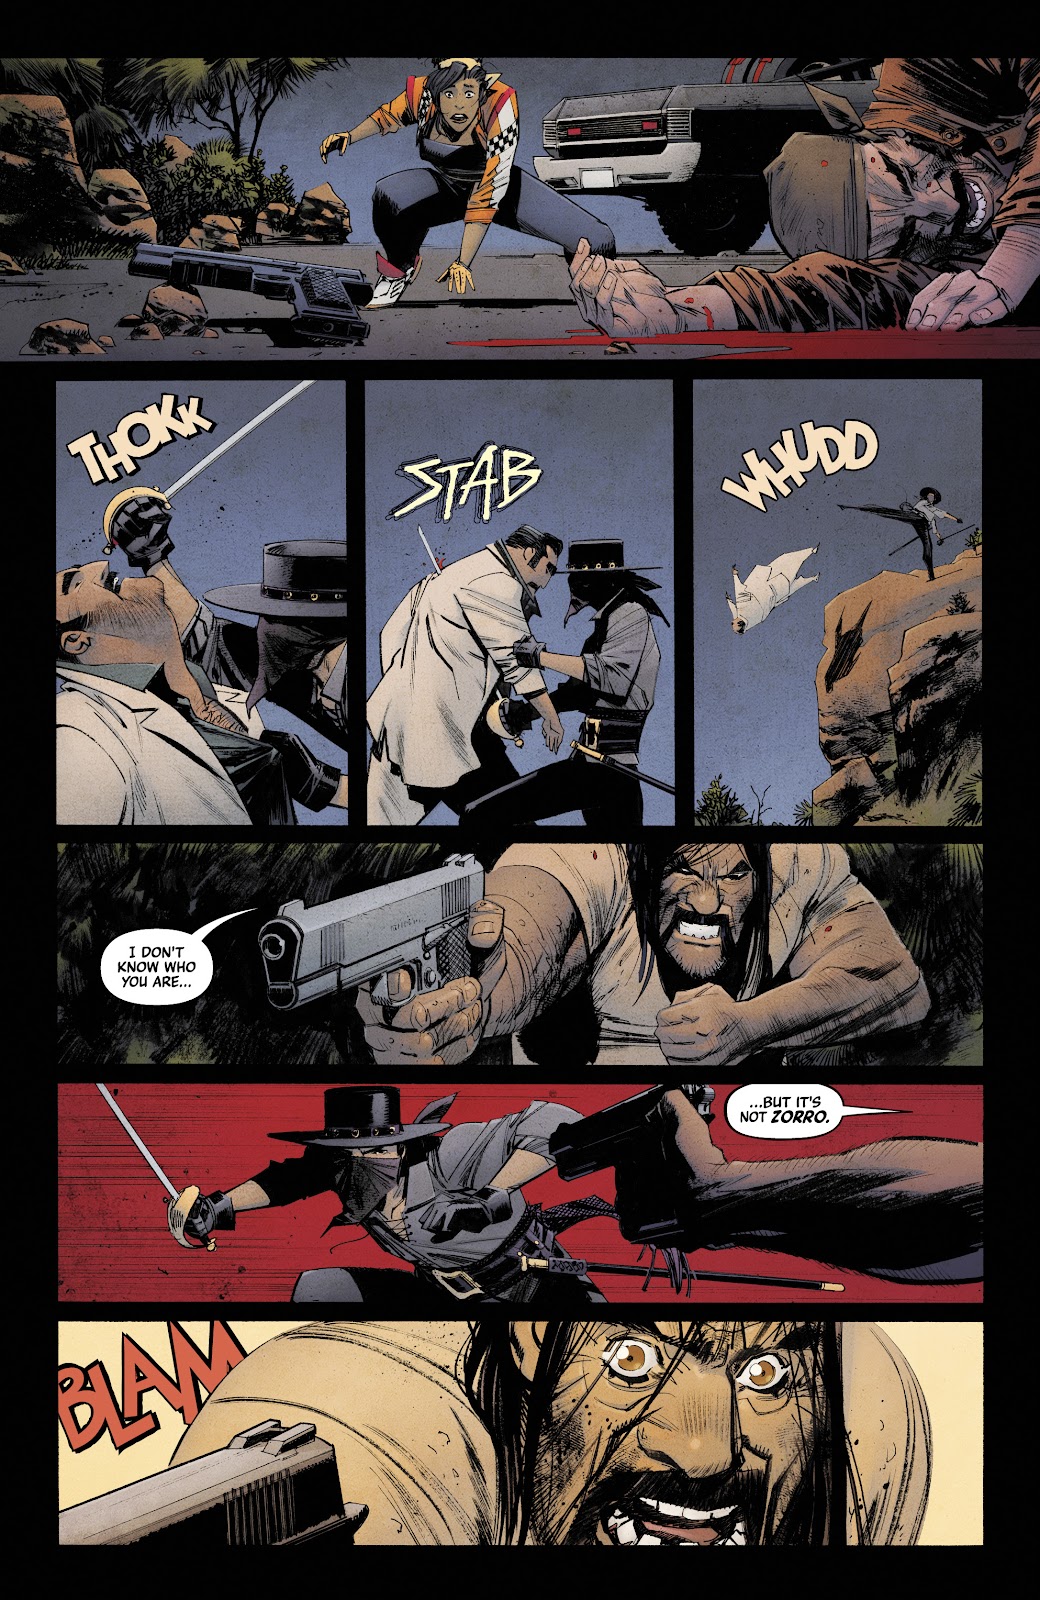 Zorro: Man of the Dead issue 1 - Page 23